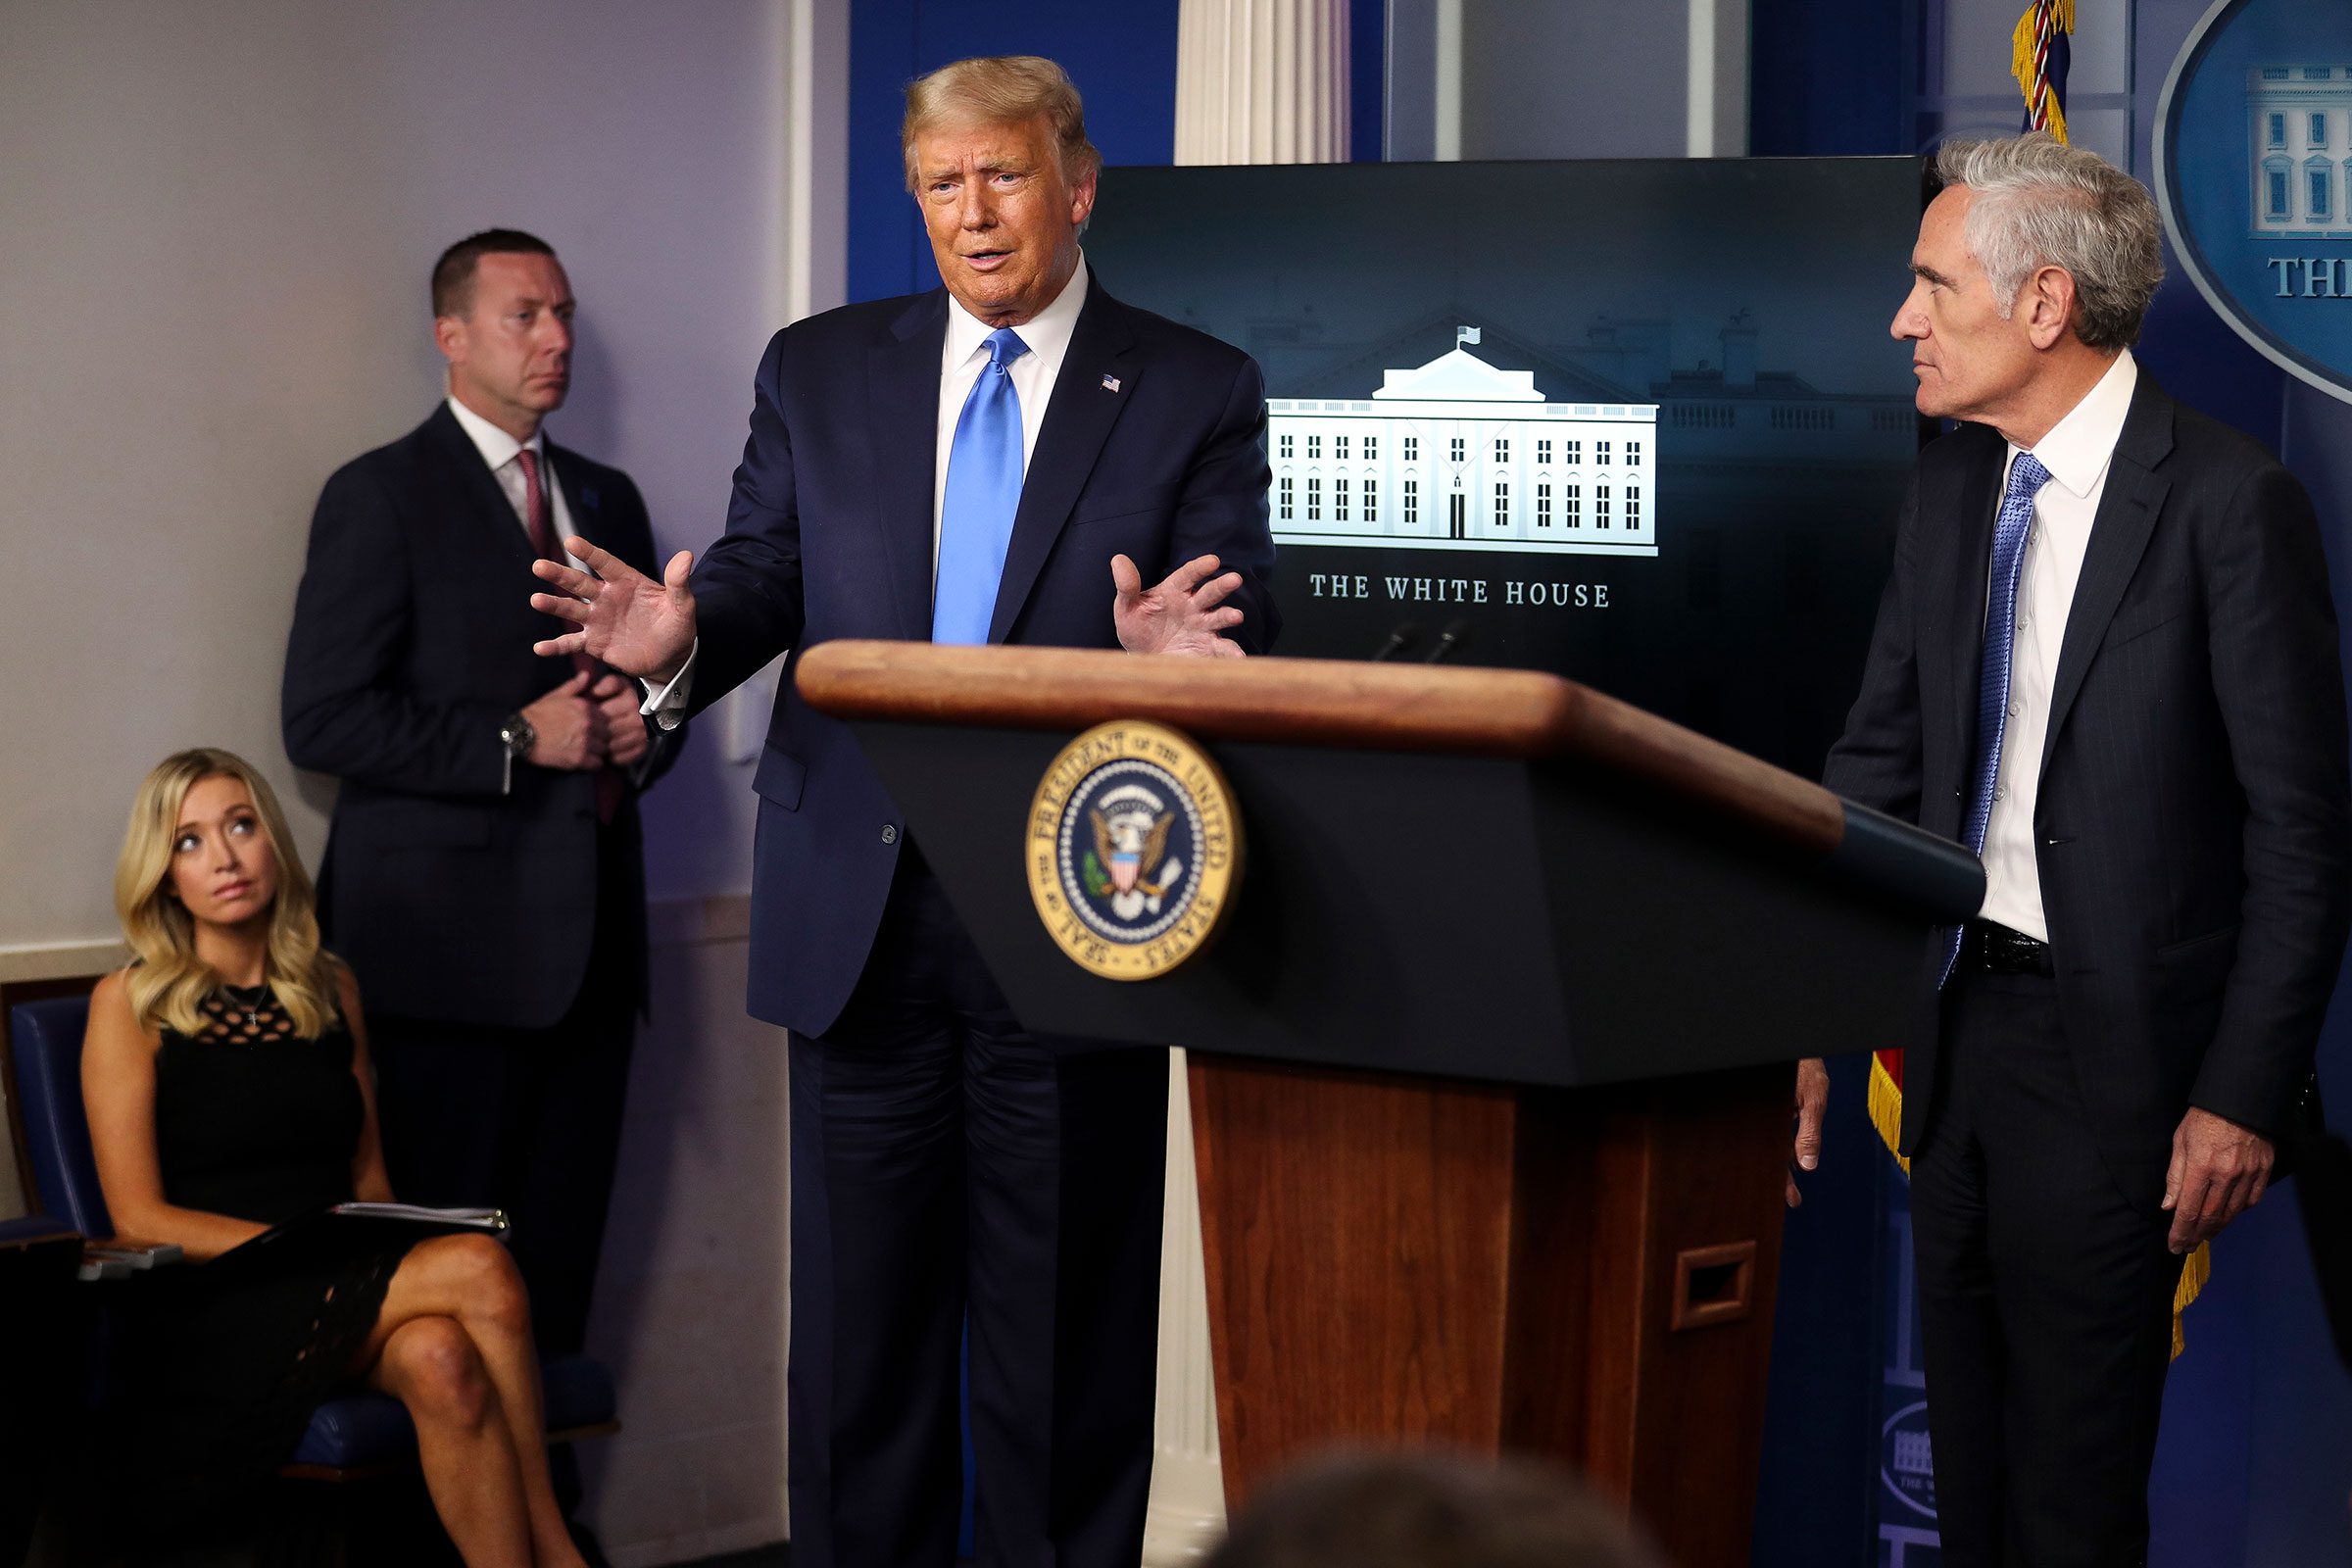 President Donald Trump speaks as Dr. Scott Atlas, a White House adviser on the coronavirus, right, and White House Press Secretary Kayleigh McEnany, far left, listen during a press briefing at the White House in Washington, on Wednesday, Sept. 23, 2020. (Oliver Contreras/The New York Times)